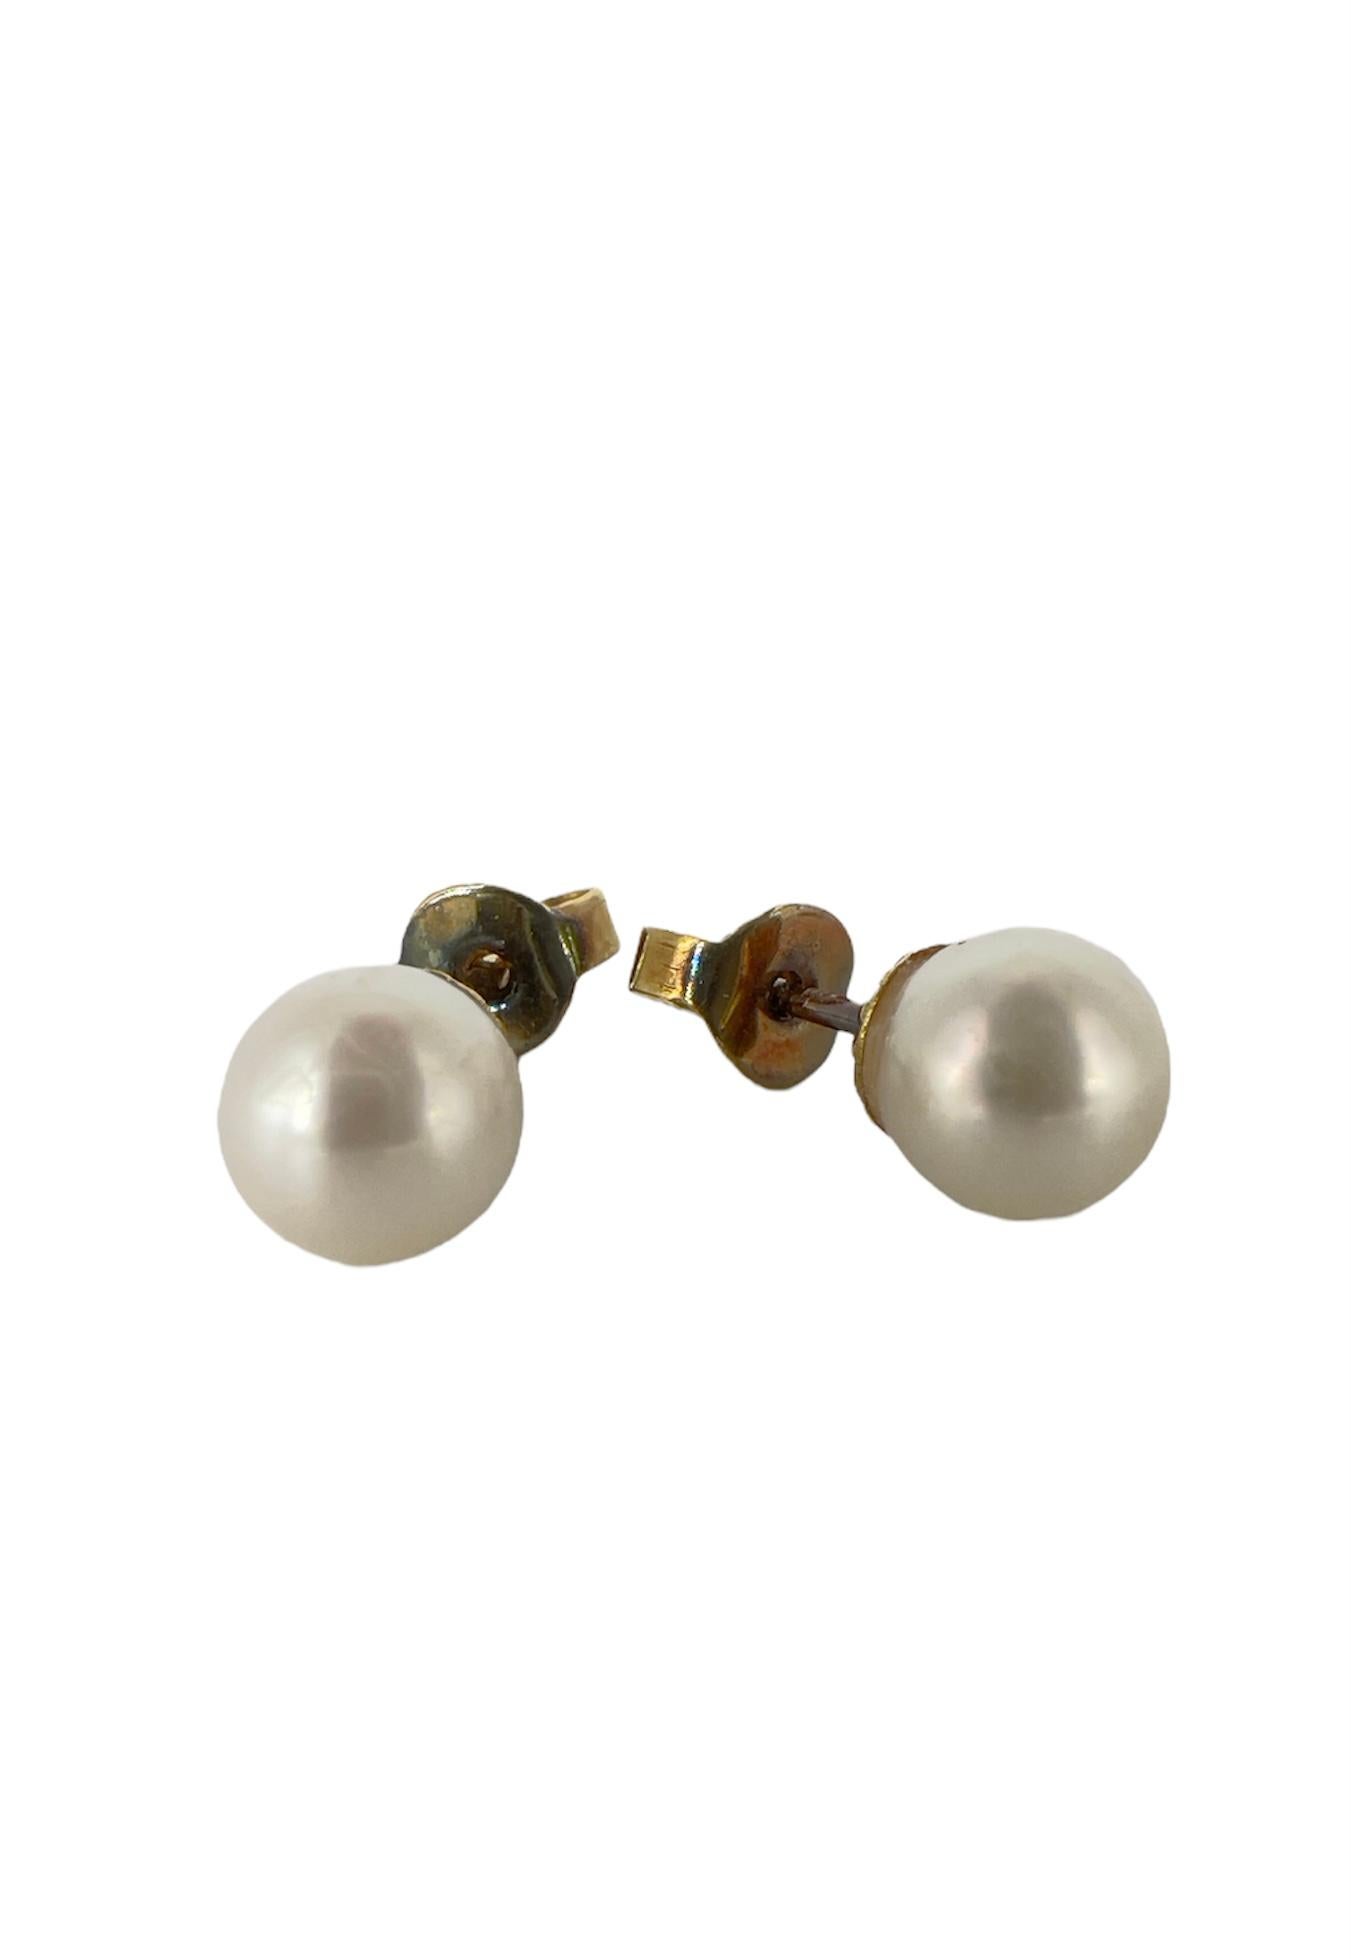 These earrings come from an auction house in Geneva, Switzerland. 
It's Bucherer brand, Swiss watchmakers and jewelers. 
It contains 750 gold and cultured pearls. It's sold in it's original box. 